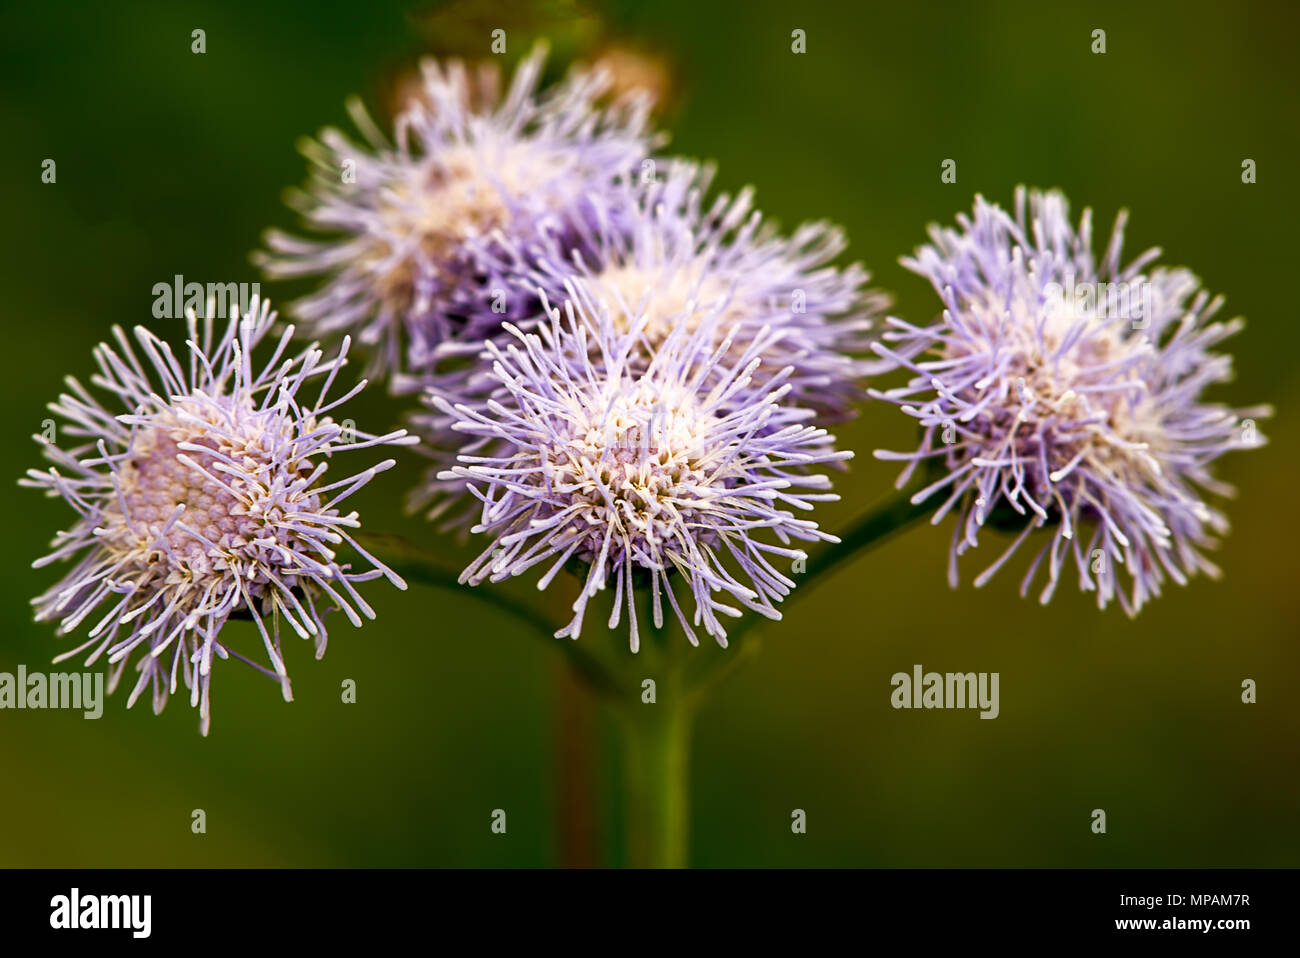 Macro photography of a delicate group of wild mistflowers. Stock Photo